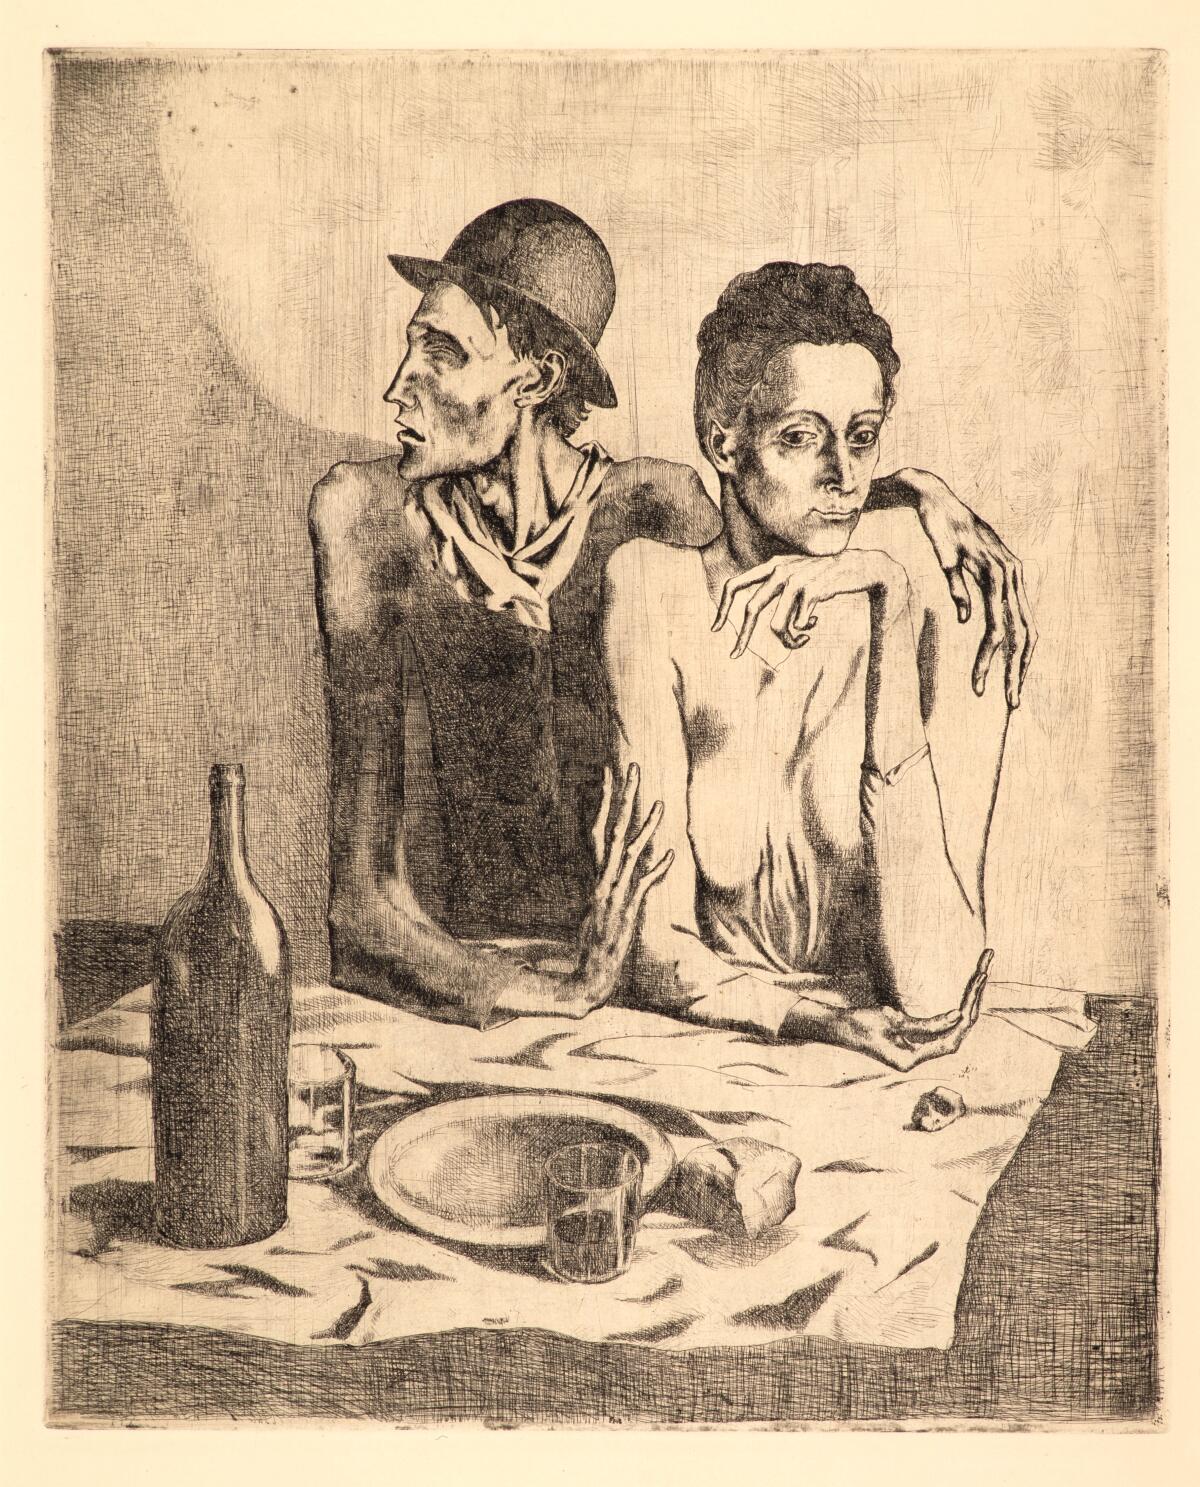 "The Frugal Repast" by Pablo Picasso (Etching, 1904). Museum purchase with funds provided by Mrs. Irving T. Snyder.